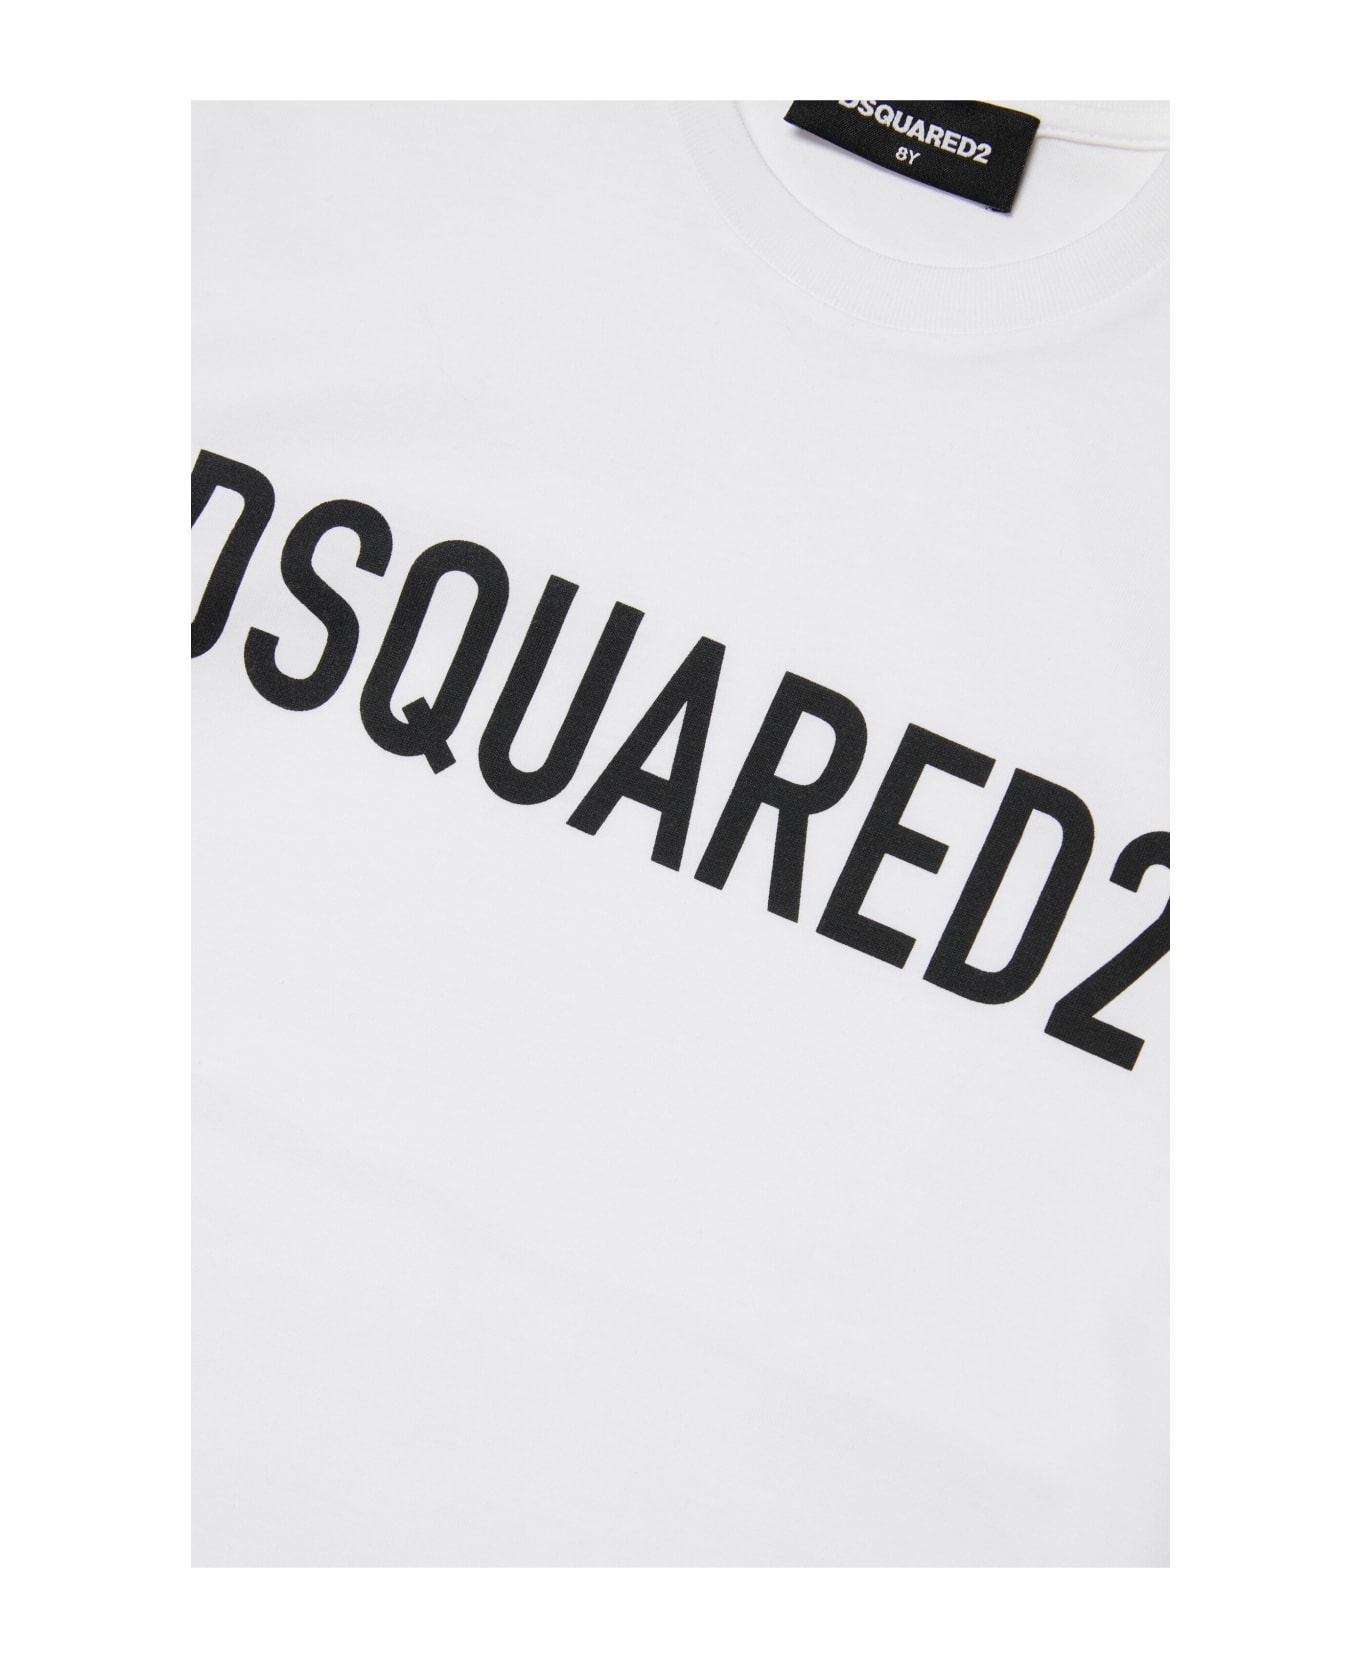 Dsquared2 D2t971u Relax-eco T-shirt Dsquared Organic Cotton Jersey Crewneck T-shirt With Logo - White Tシャツ＆ポロシャツ